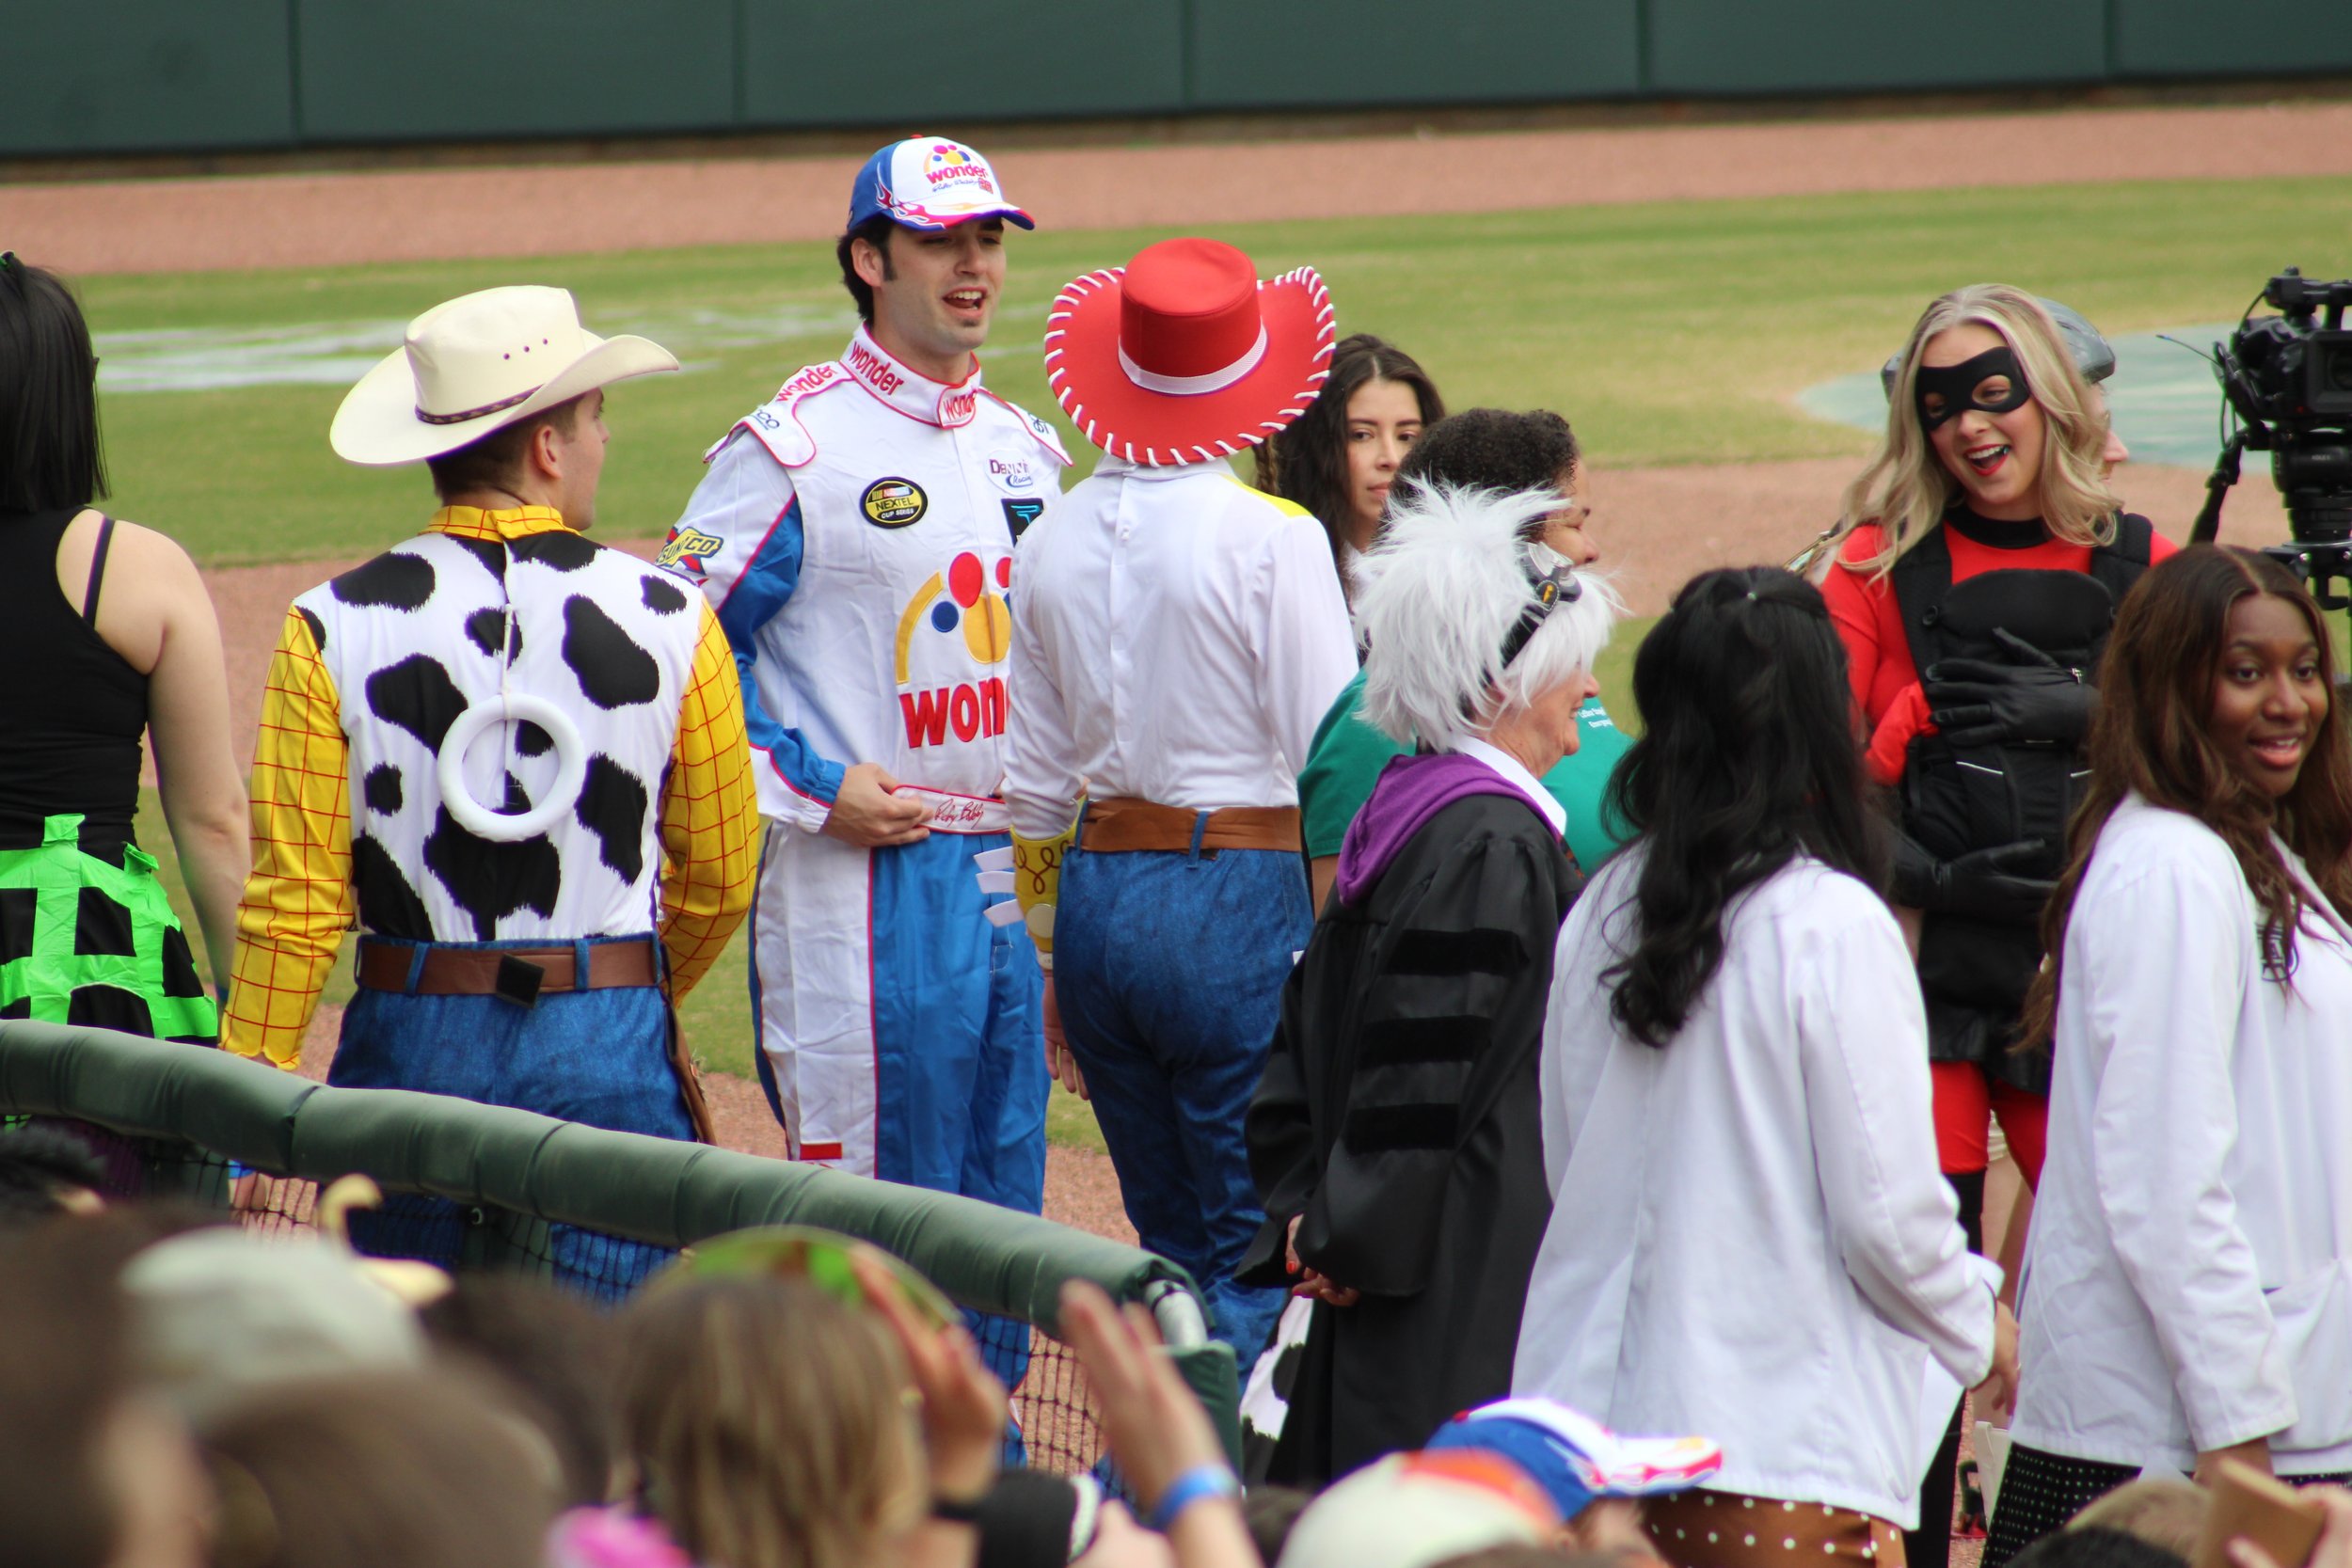  Students dressed up in costumes inspired from the early 2000s at MCG’s Match Day celebration on March 15. 